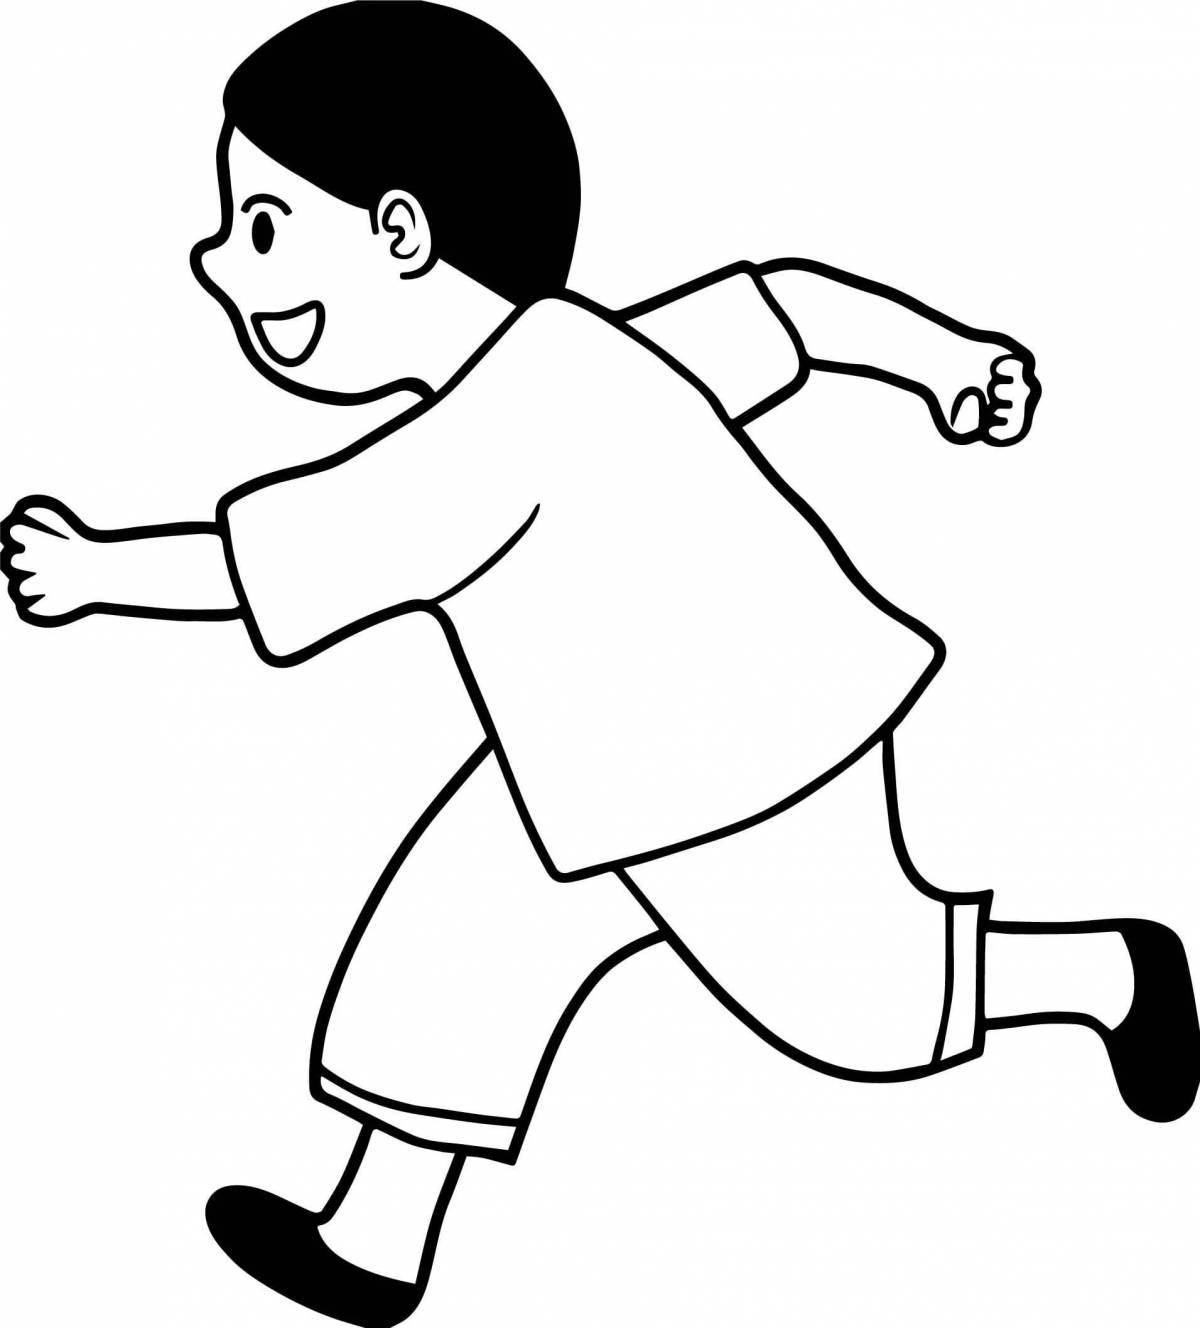 Exciting running coloring page